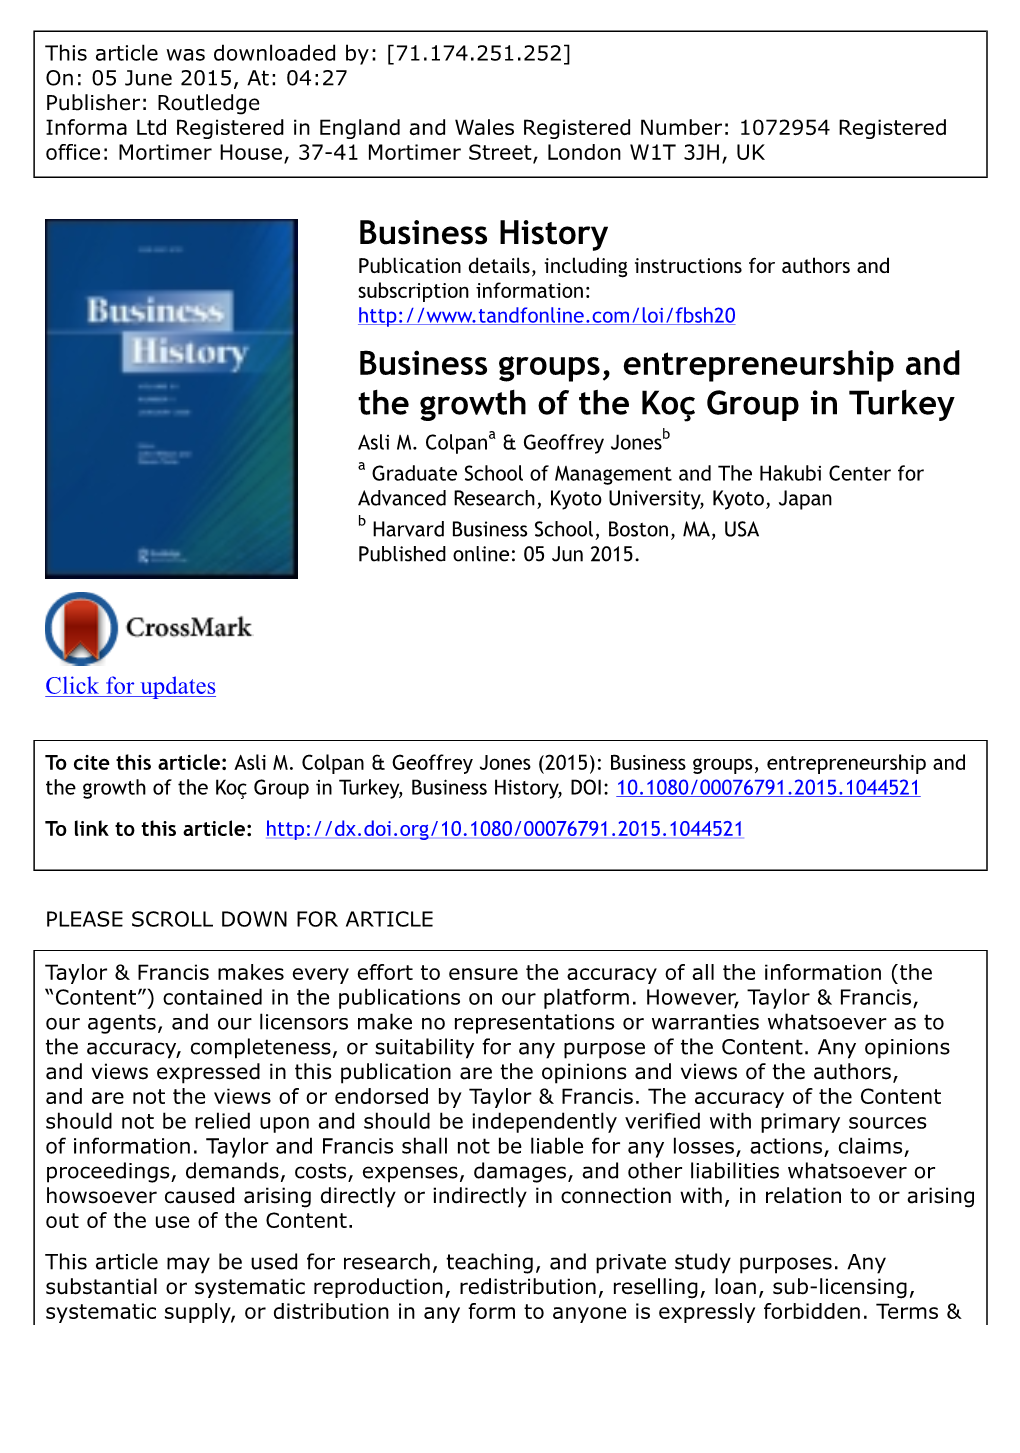 "Business Groups, Entrepreneurship and the Growth of the Koç Group In